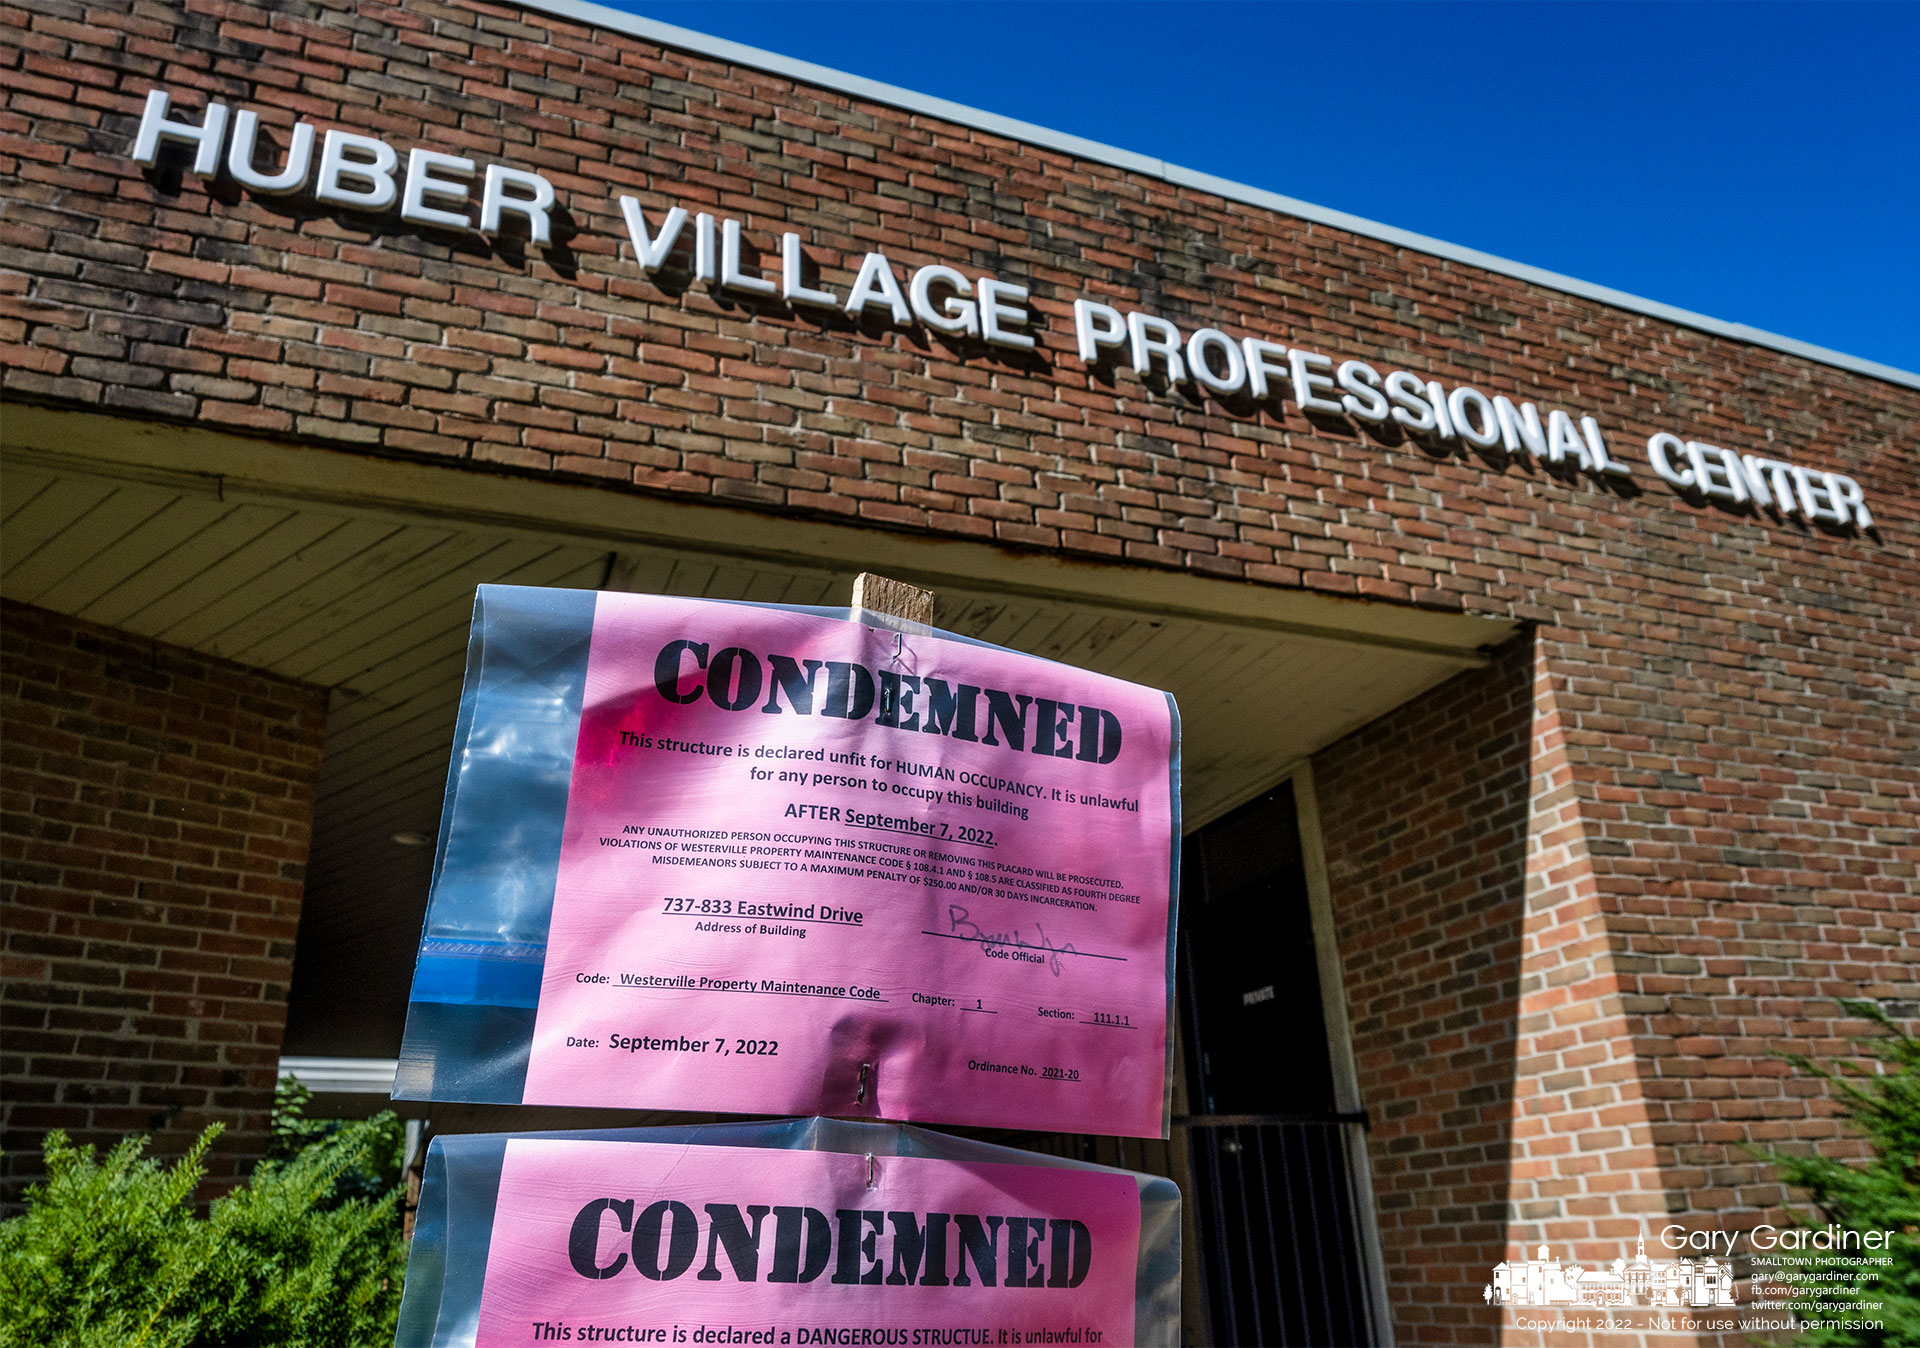 Condemned notices mark the condition of the former medical office at Huber Village Blvd. and Eastwind Drive where a planned drug treatment facility began demolishing the old offices before stopping construction. My Final Photo for October 5, 2022.